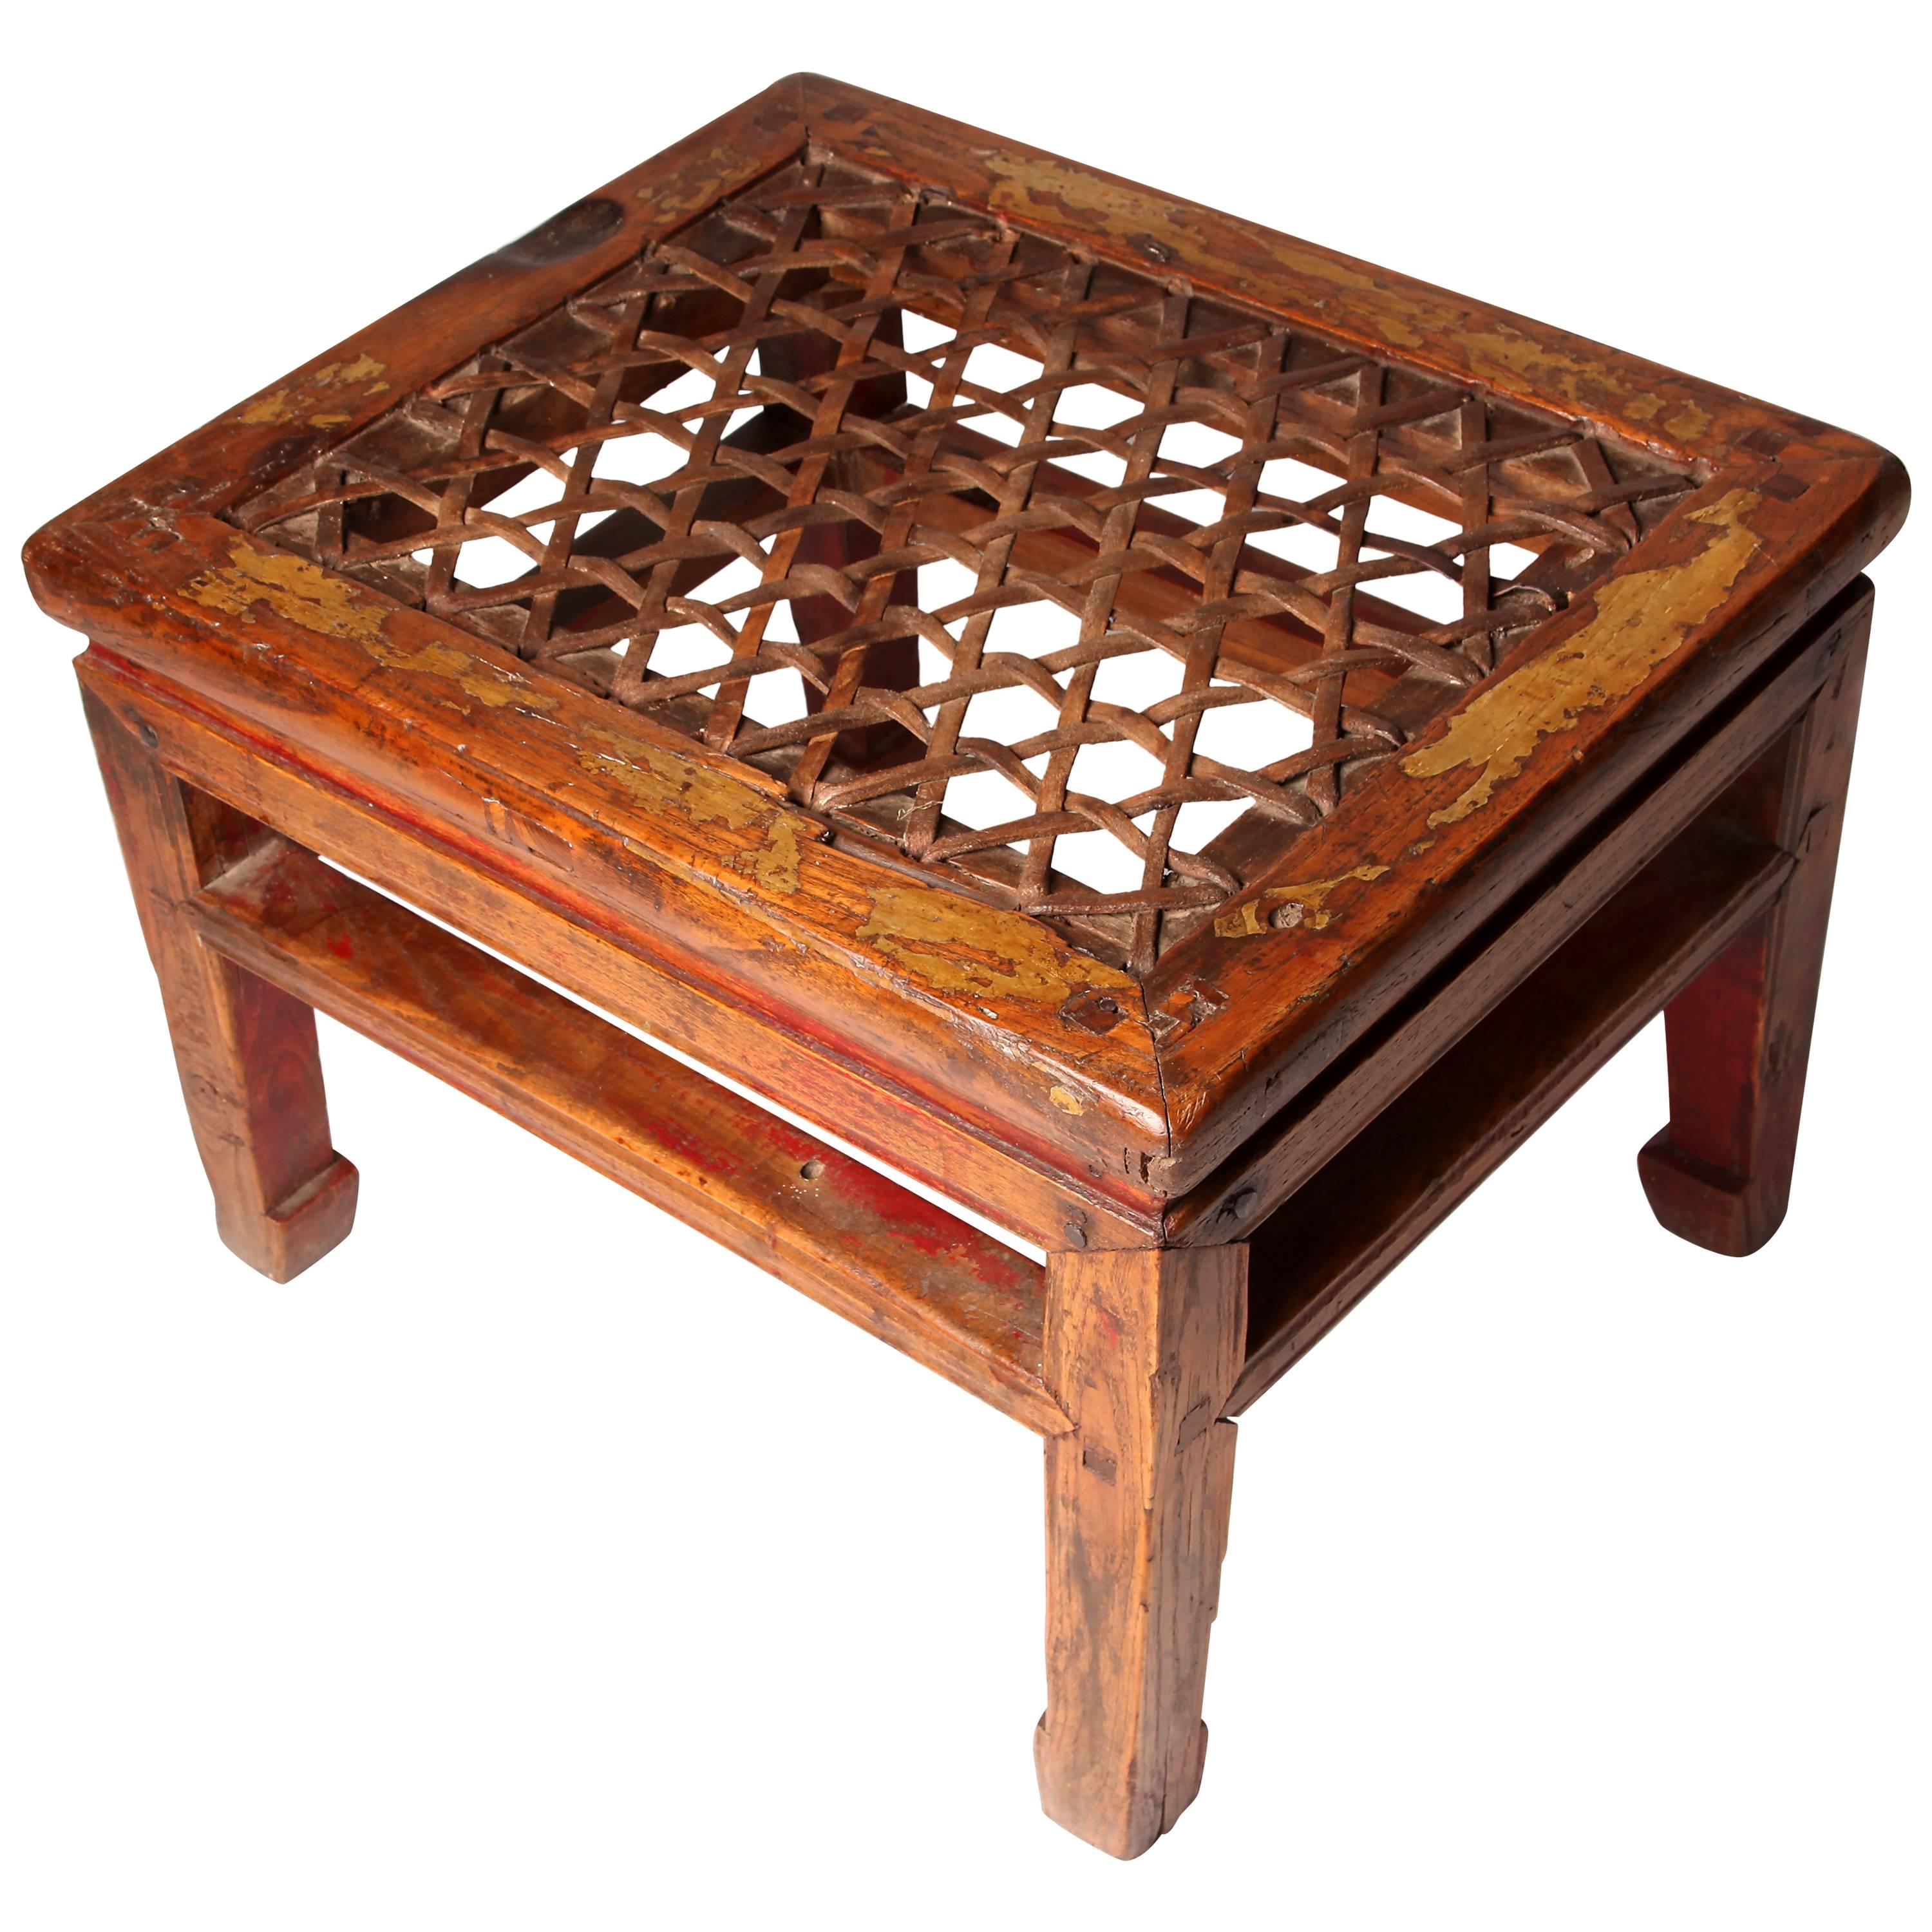 Chinese Rectangular Stool with Woven Seat and Horse-Hoof Feet